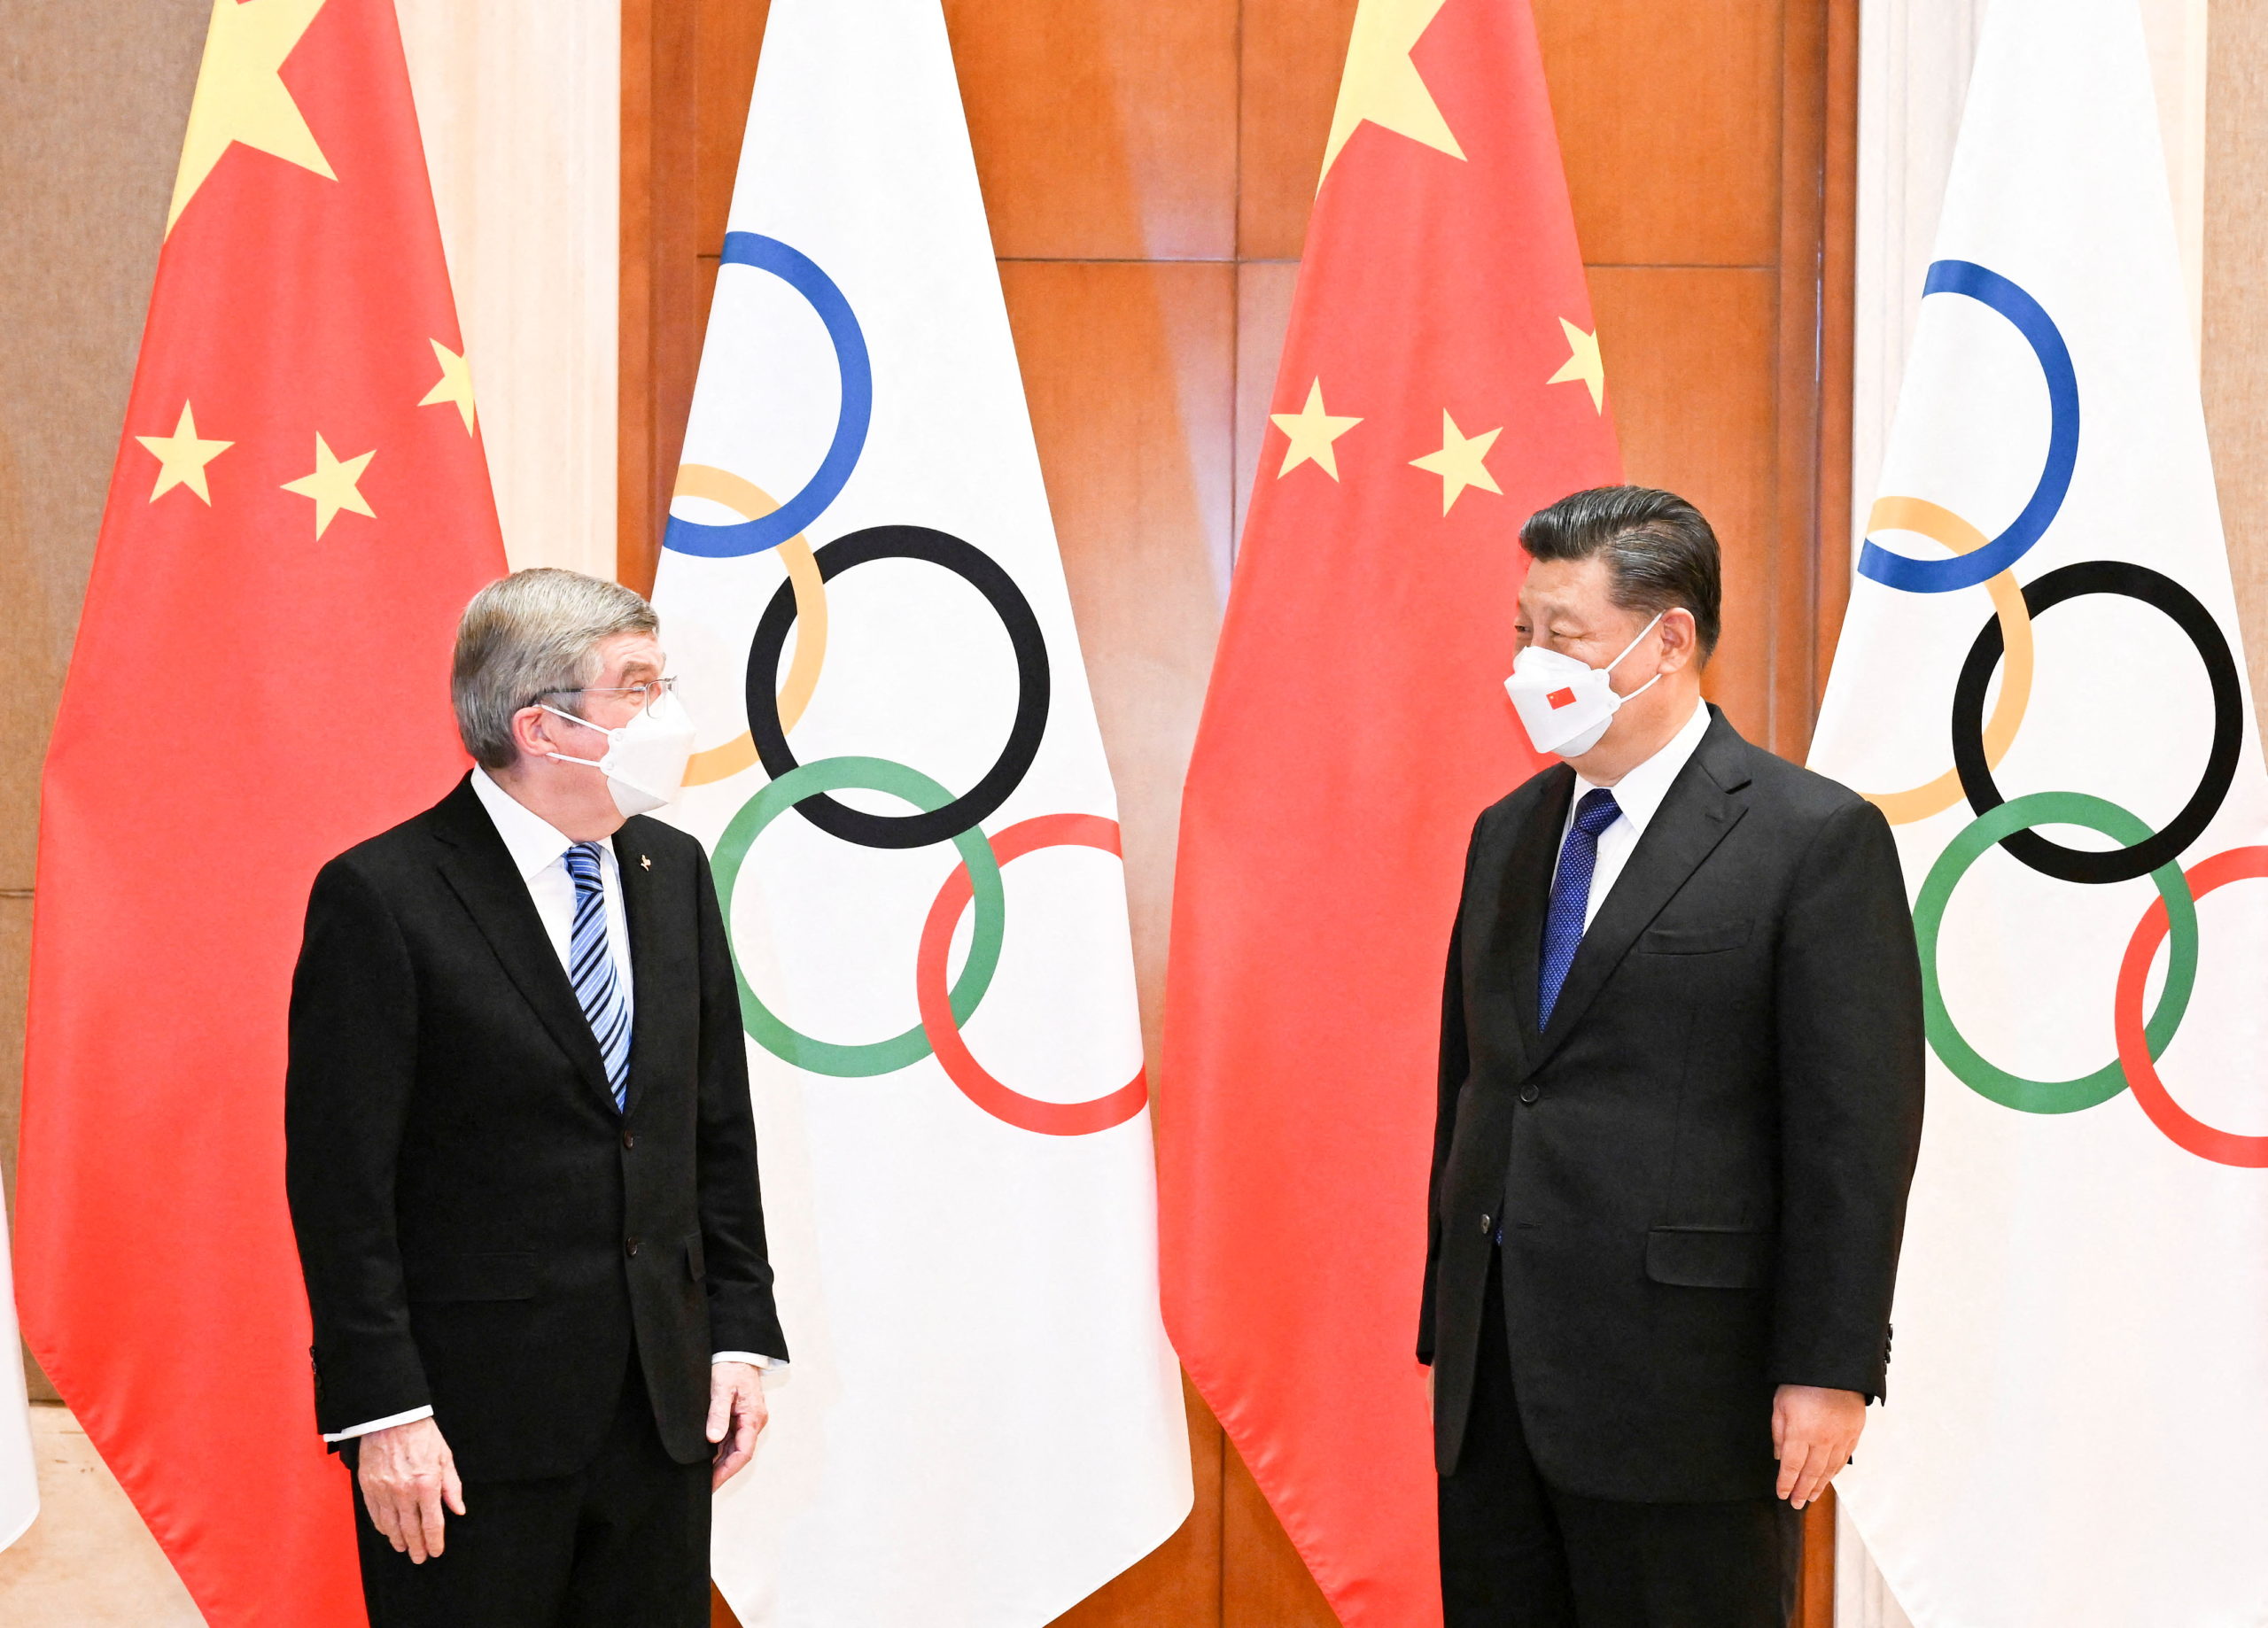 Chinese President Xi Jinping meets with International Olympic Committee (IOC) President Thomas Bach at the Diaoyutai State Guesthouse in Beijing, China January 25, 2022. Picture taken January 25, 2022.